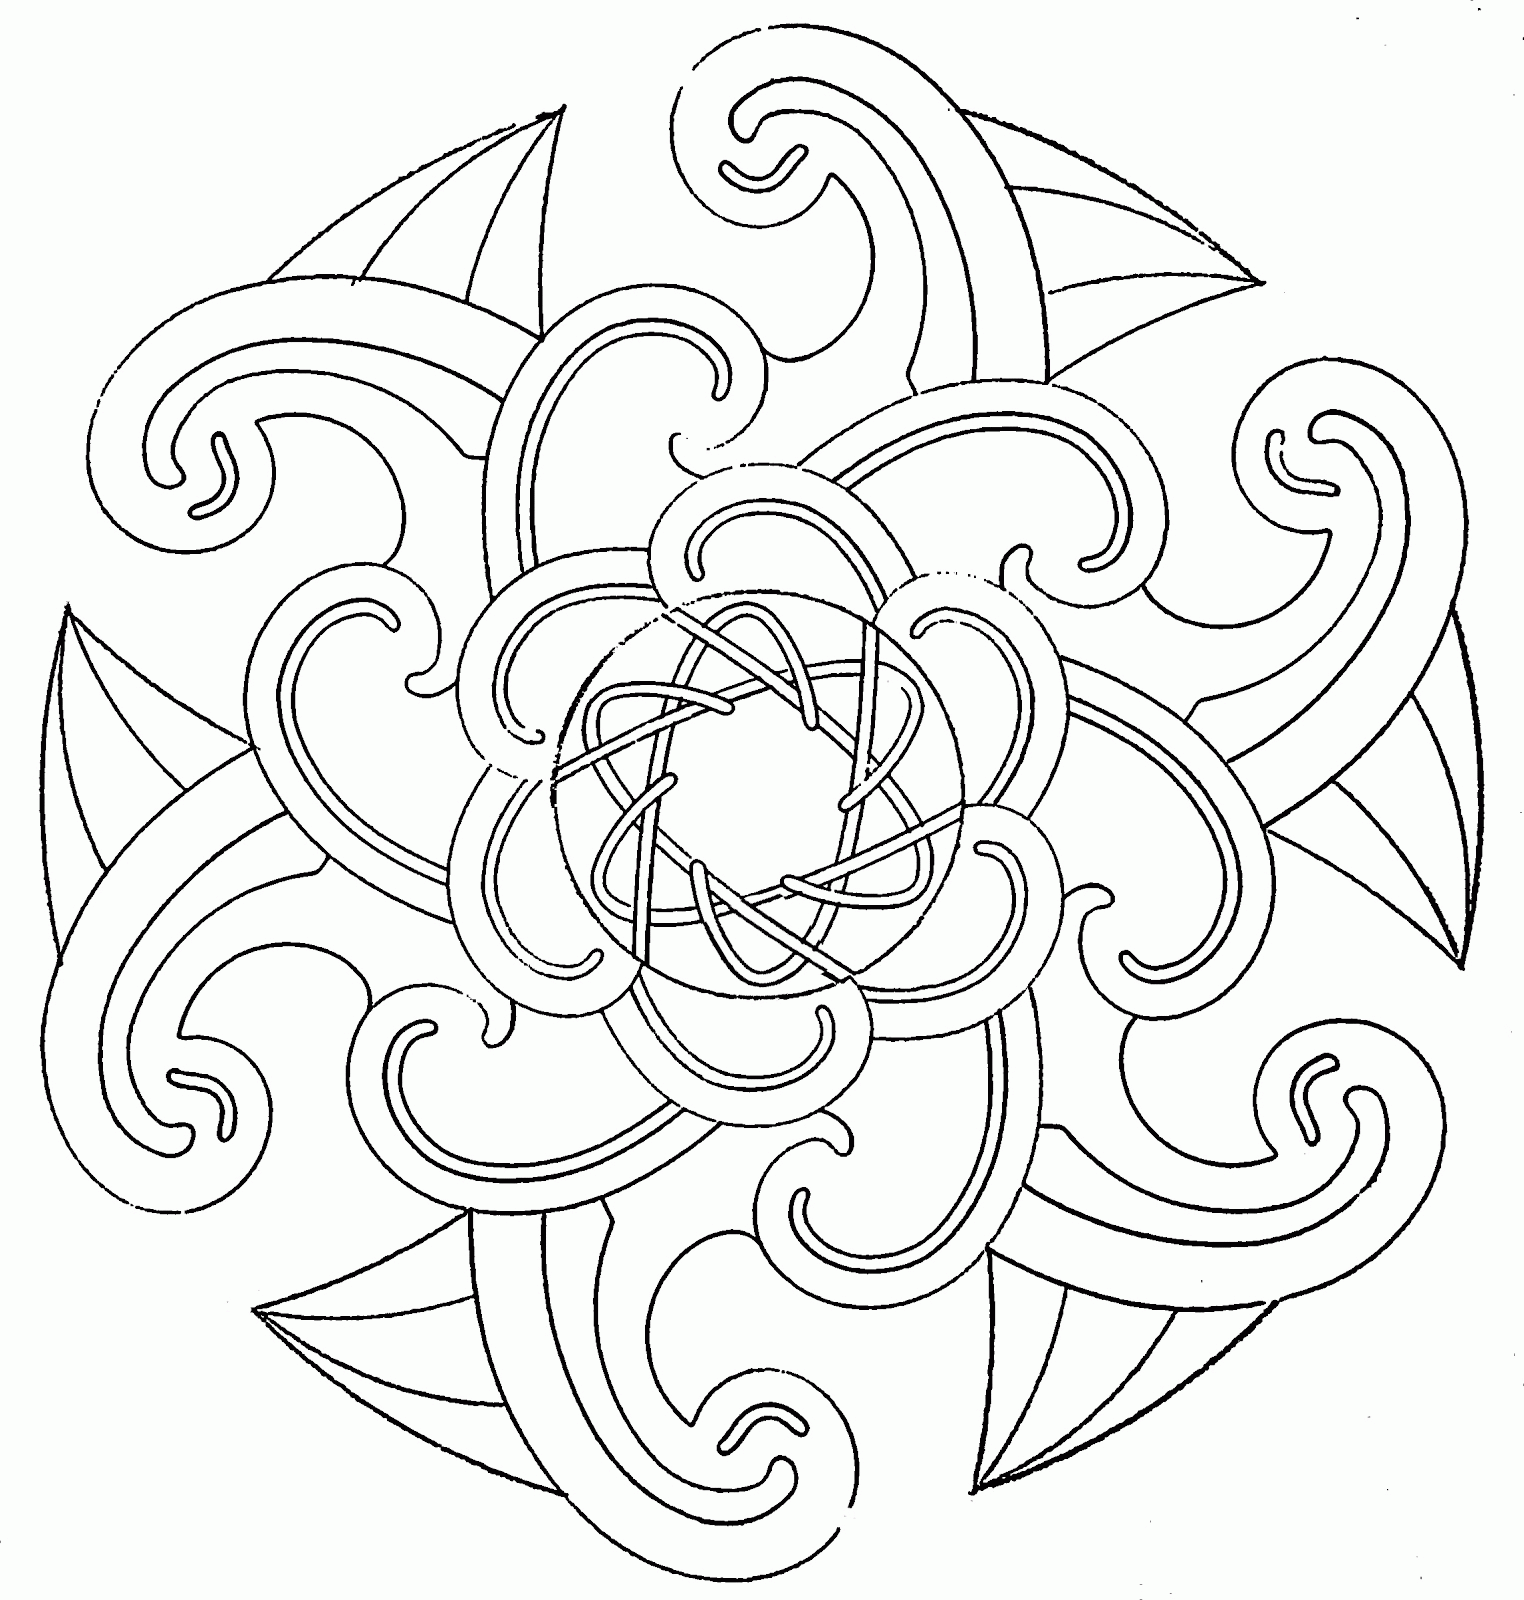 Cool Coloring Designs - Coloring Pages for Kids and for Adults